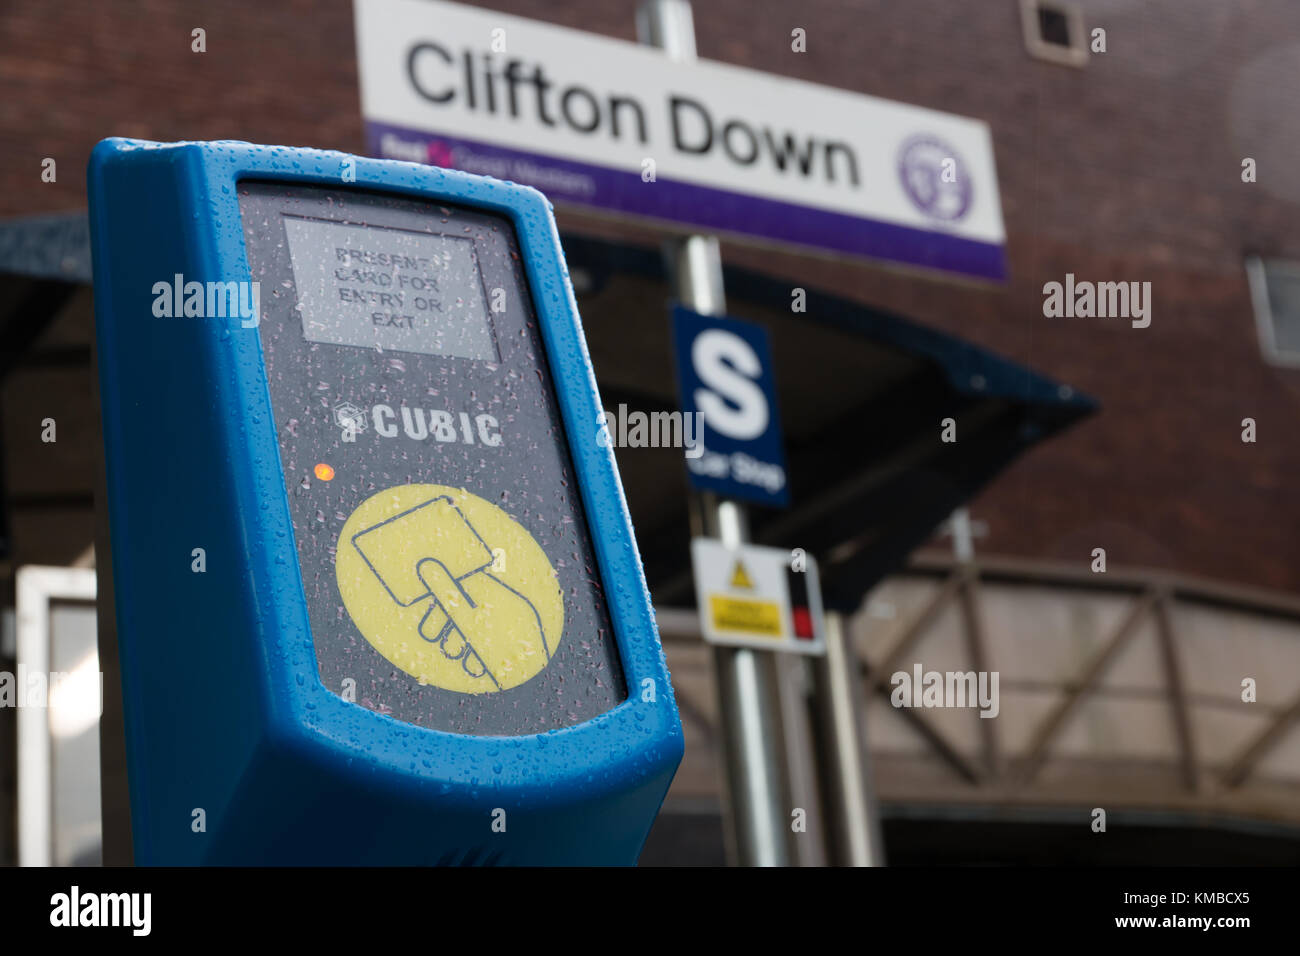 Cubic touch card ticket validation terminal at Clifton Down Railway station Stock Photo